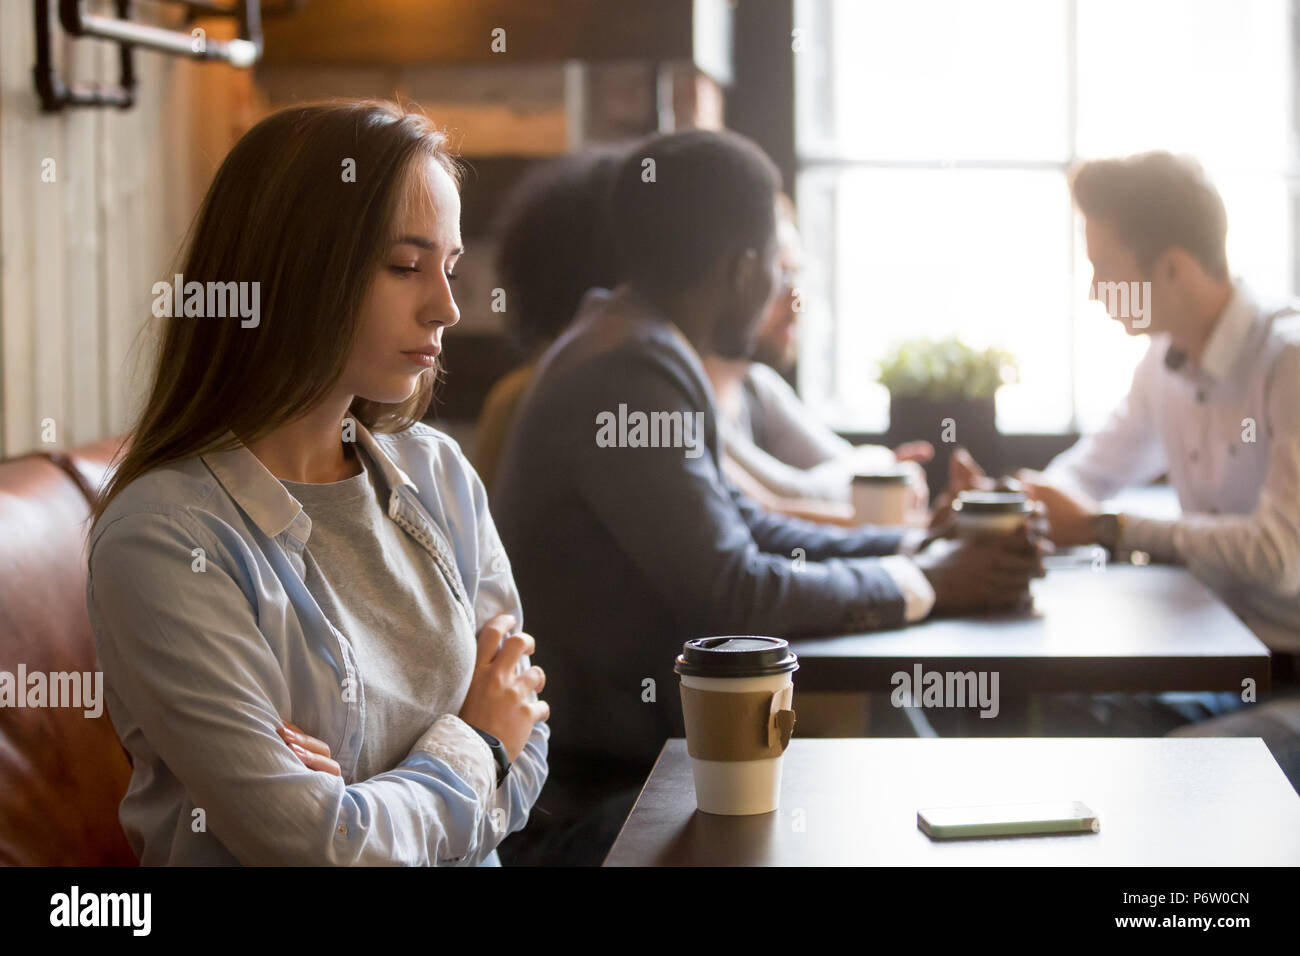 Upset rejected girl ghosted by boyfriend in coffeeshop Stock Photo